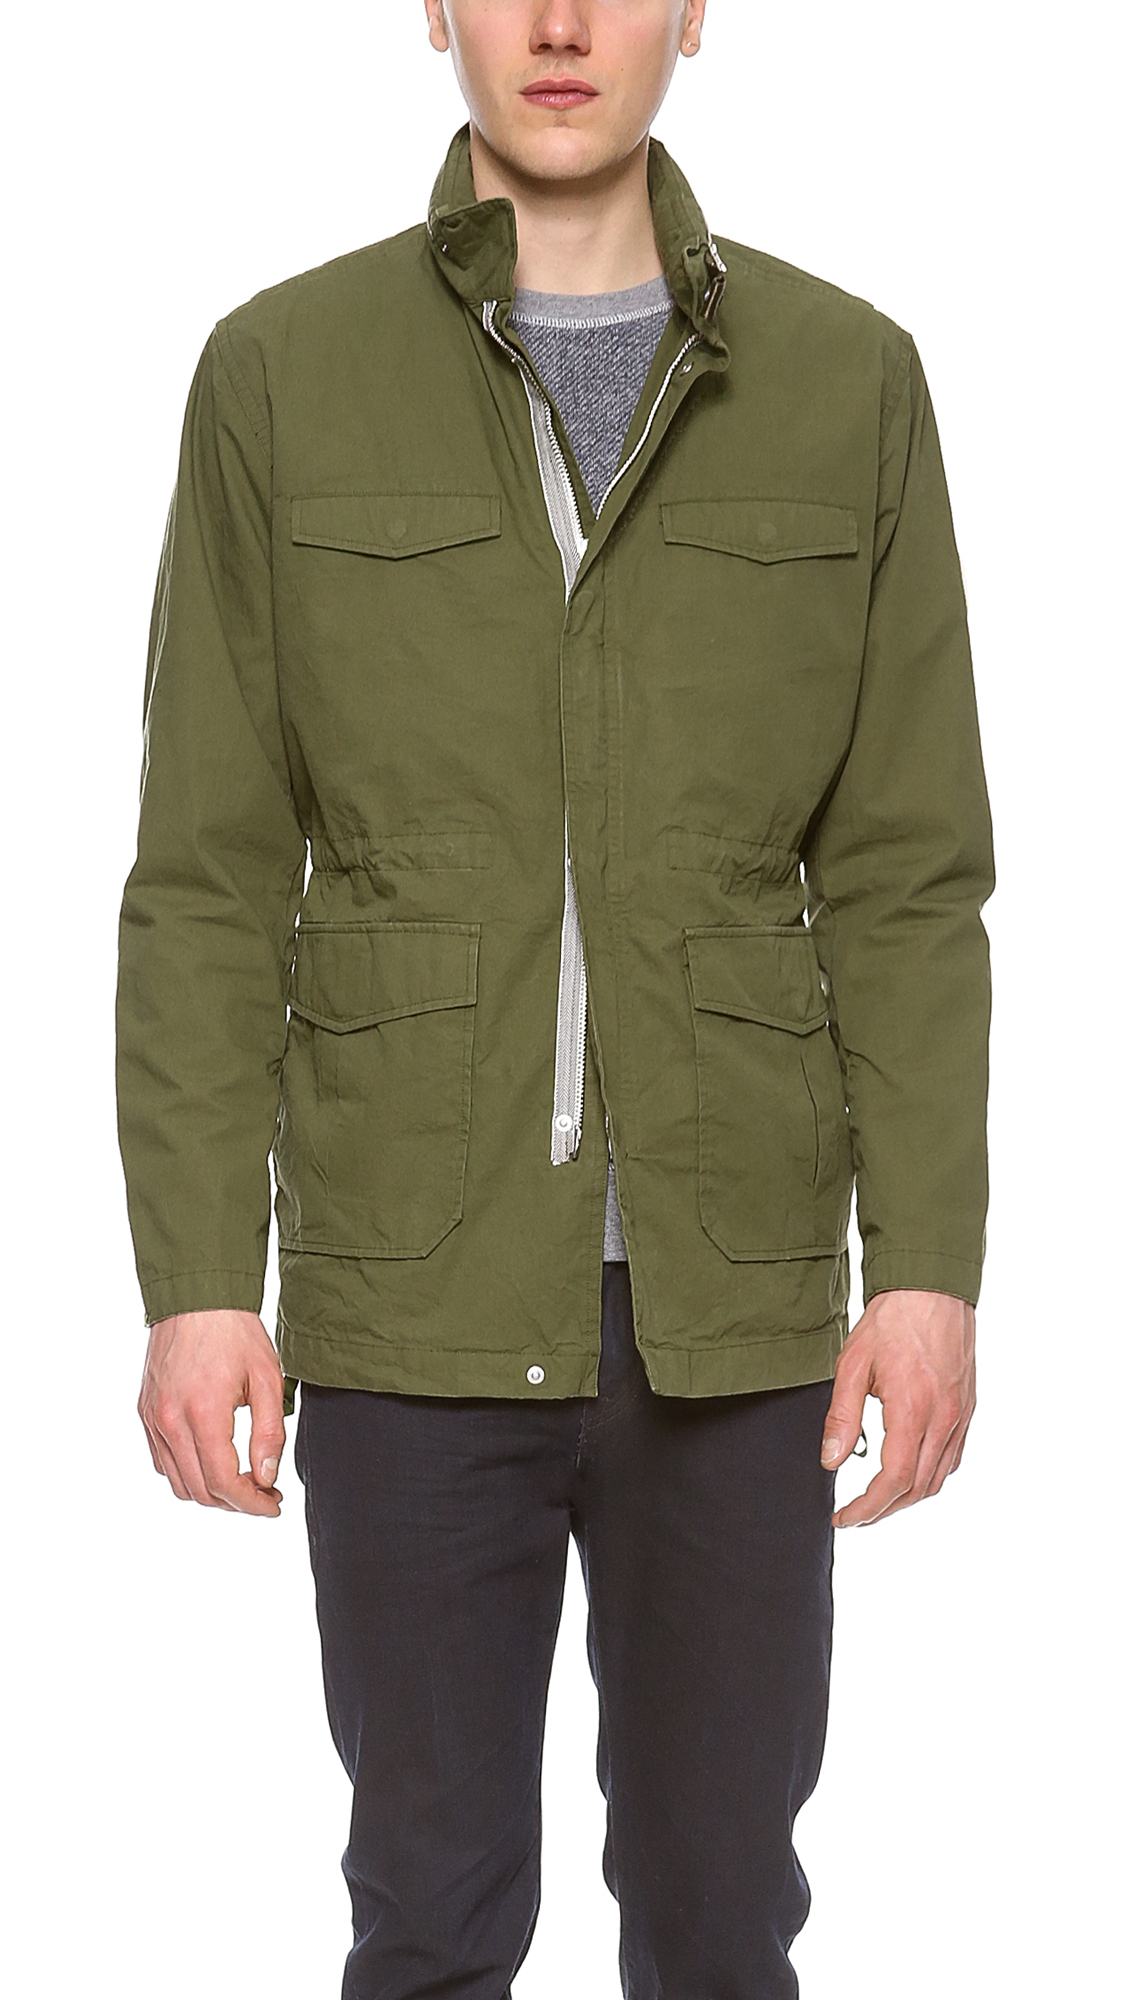 Lyst - Norse Projects Skipper Scout Jacket in Green for Men